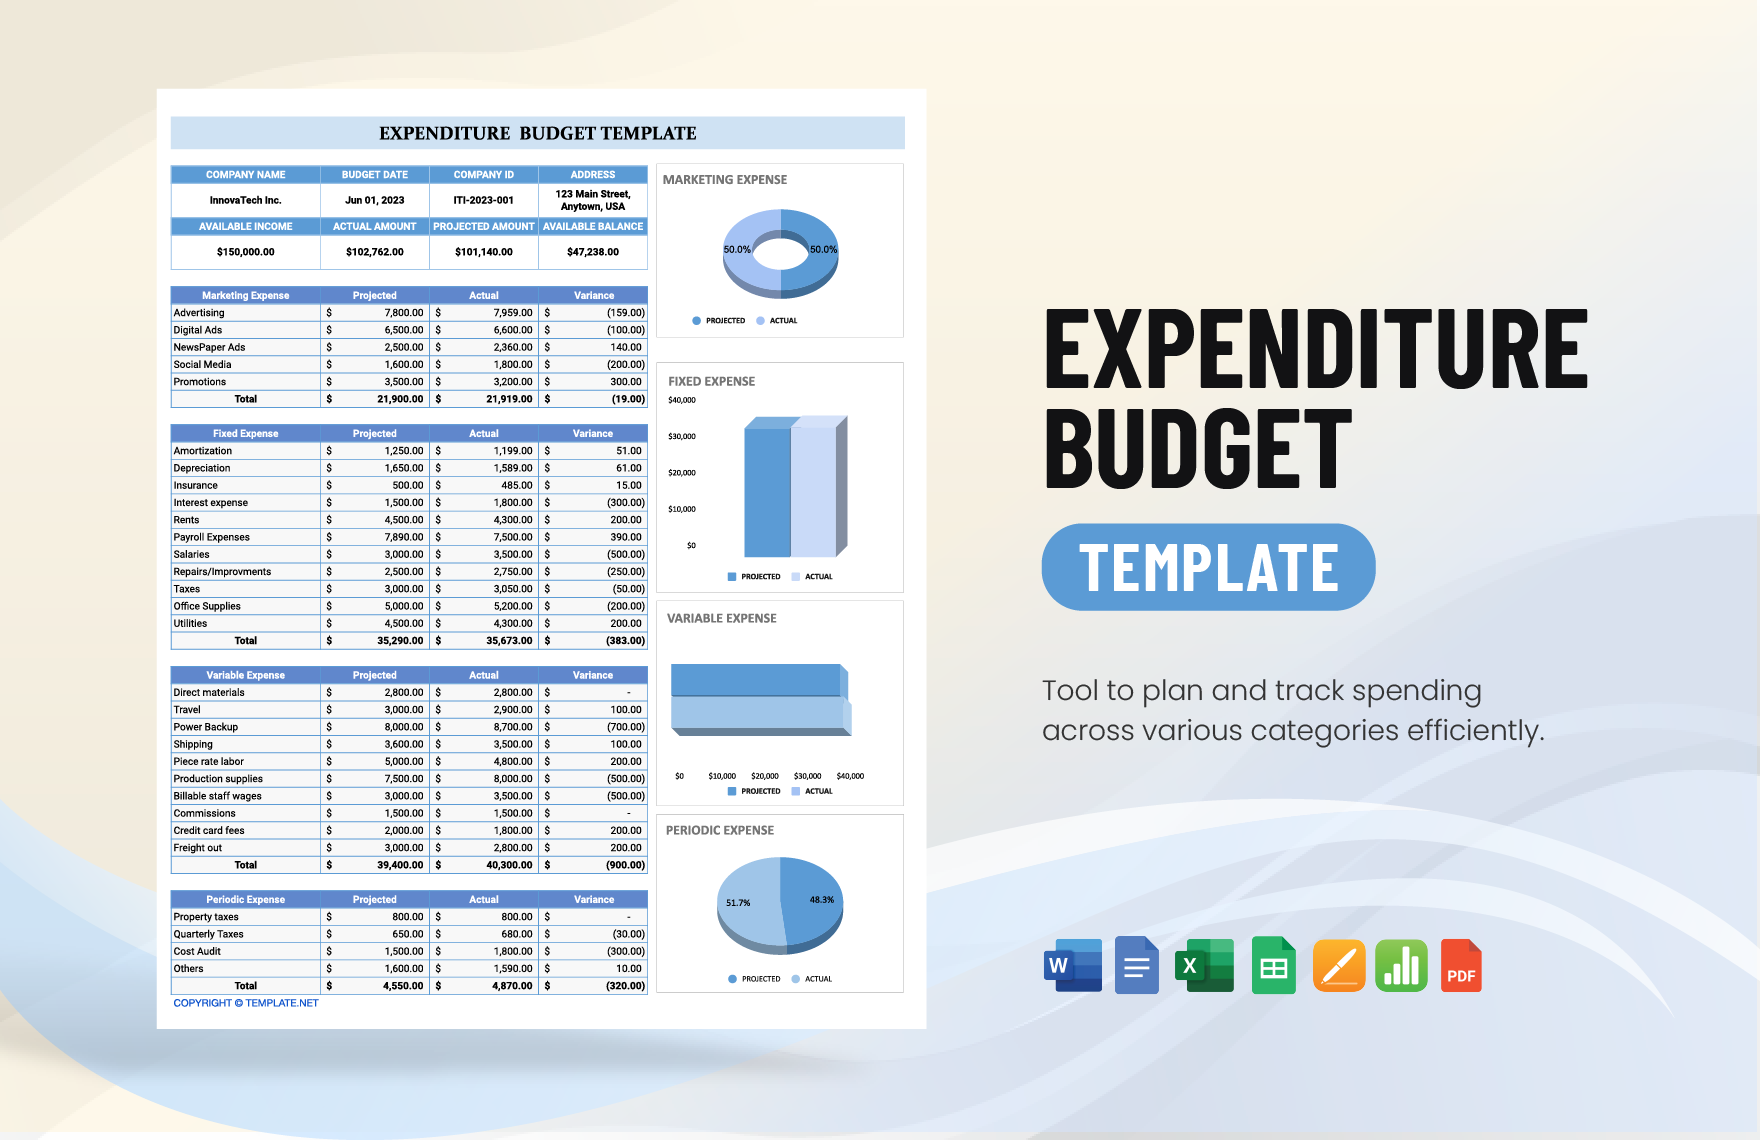 Expenditure Budget Template in Word, Google Docs, Excel, PDF, Google Sheets, Apple Pages, Apple Numbers